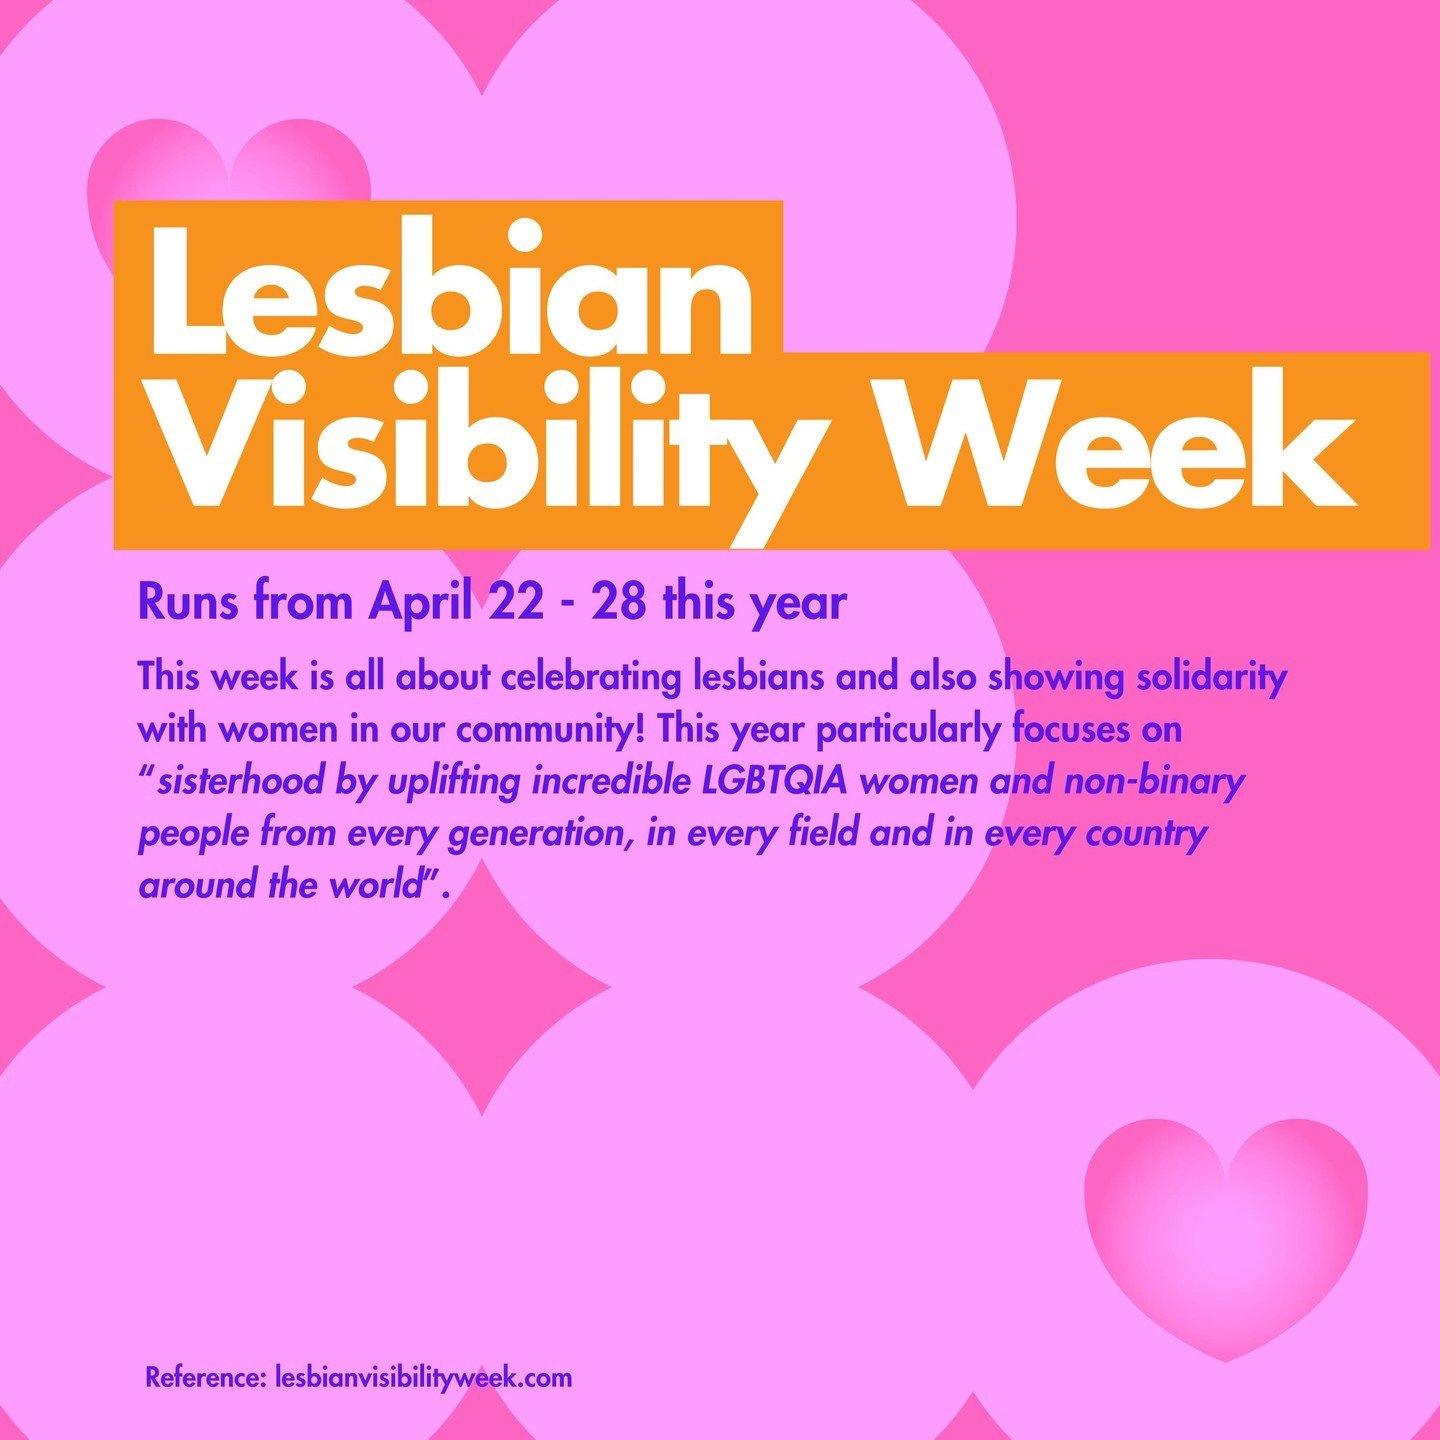 This week marks Lesbian Visibility Week, which runs from April 22-28 this year. Not only is this a week to celebrate all our lesbian siblings, but this year particularly focuses on &quot;sisterhood, by uplifting incredible LGBTQIA women and non-binar